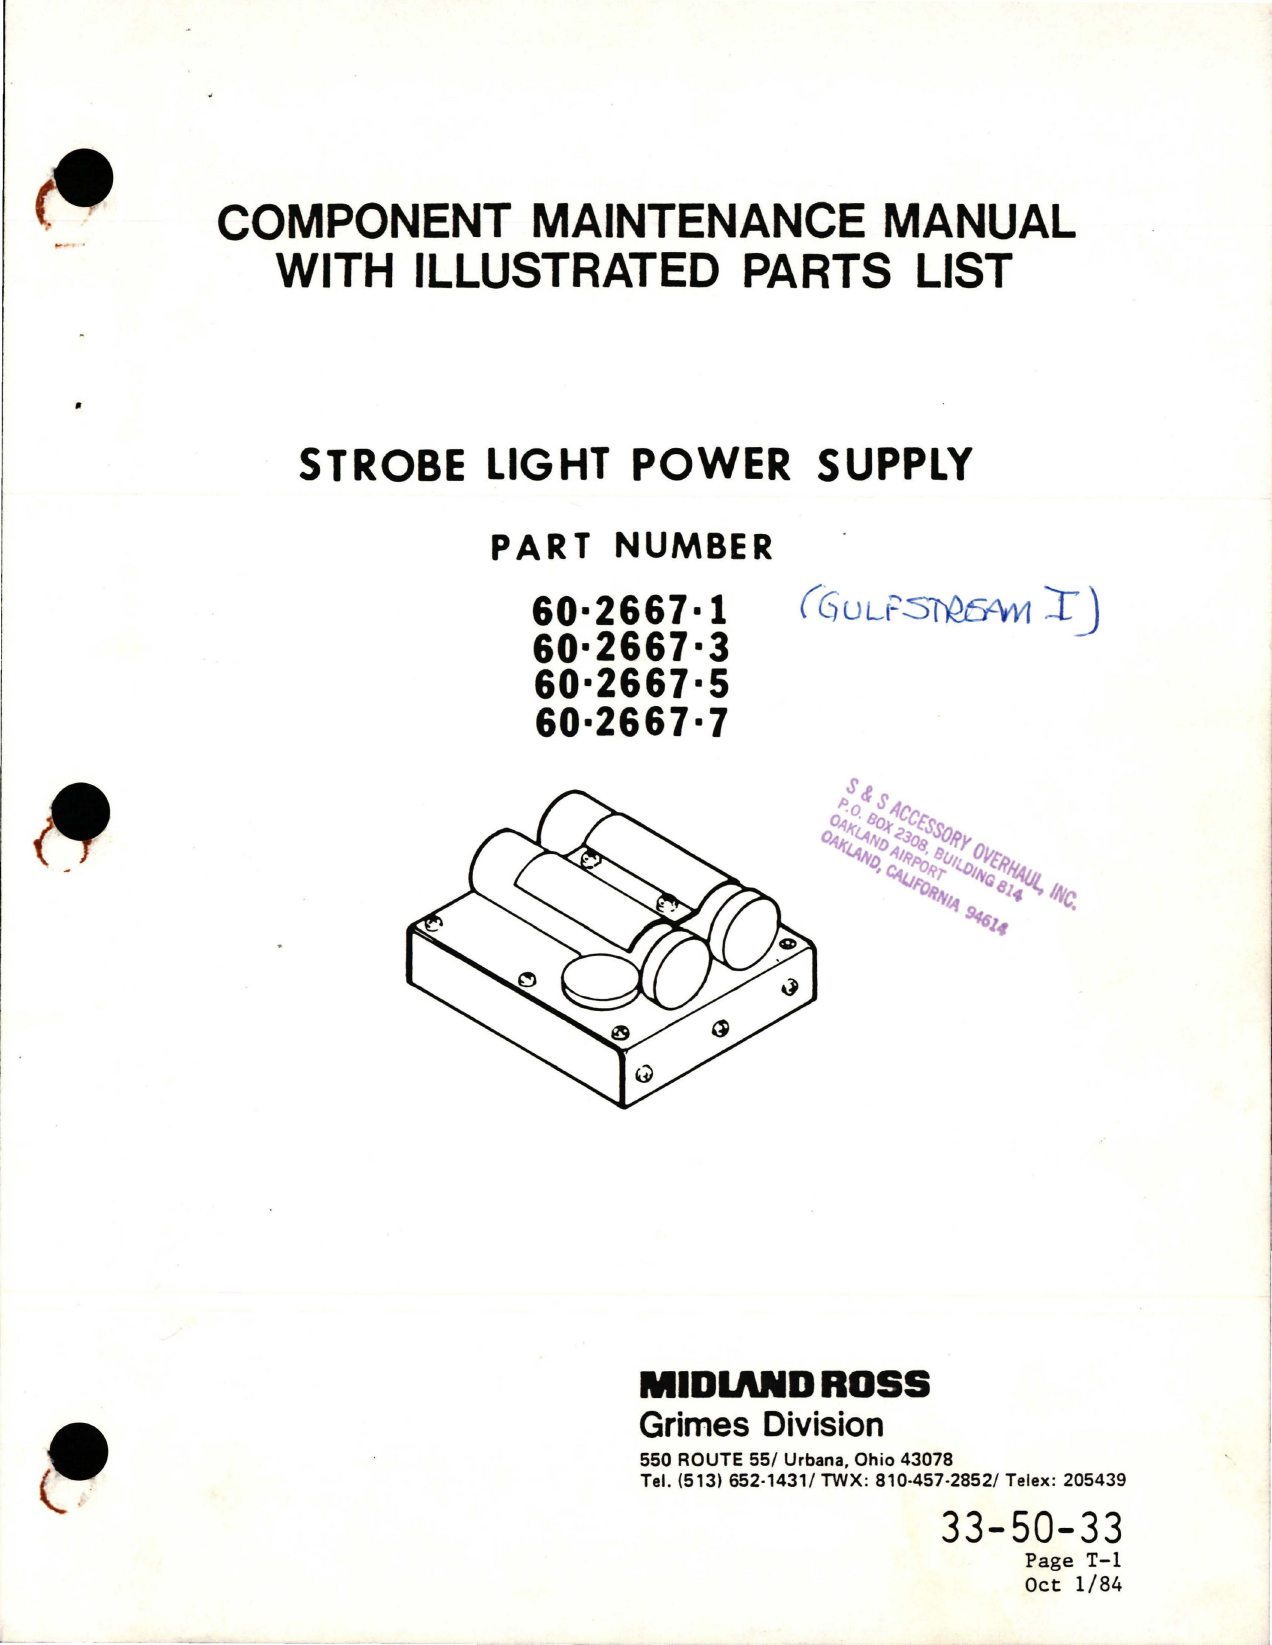 Sample page 1 from AirCorps Library document: Maintenance Manual with Illustrated Parts List for Strobe Light Power Supply